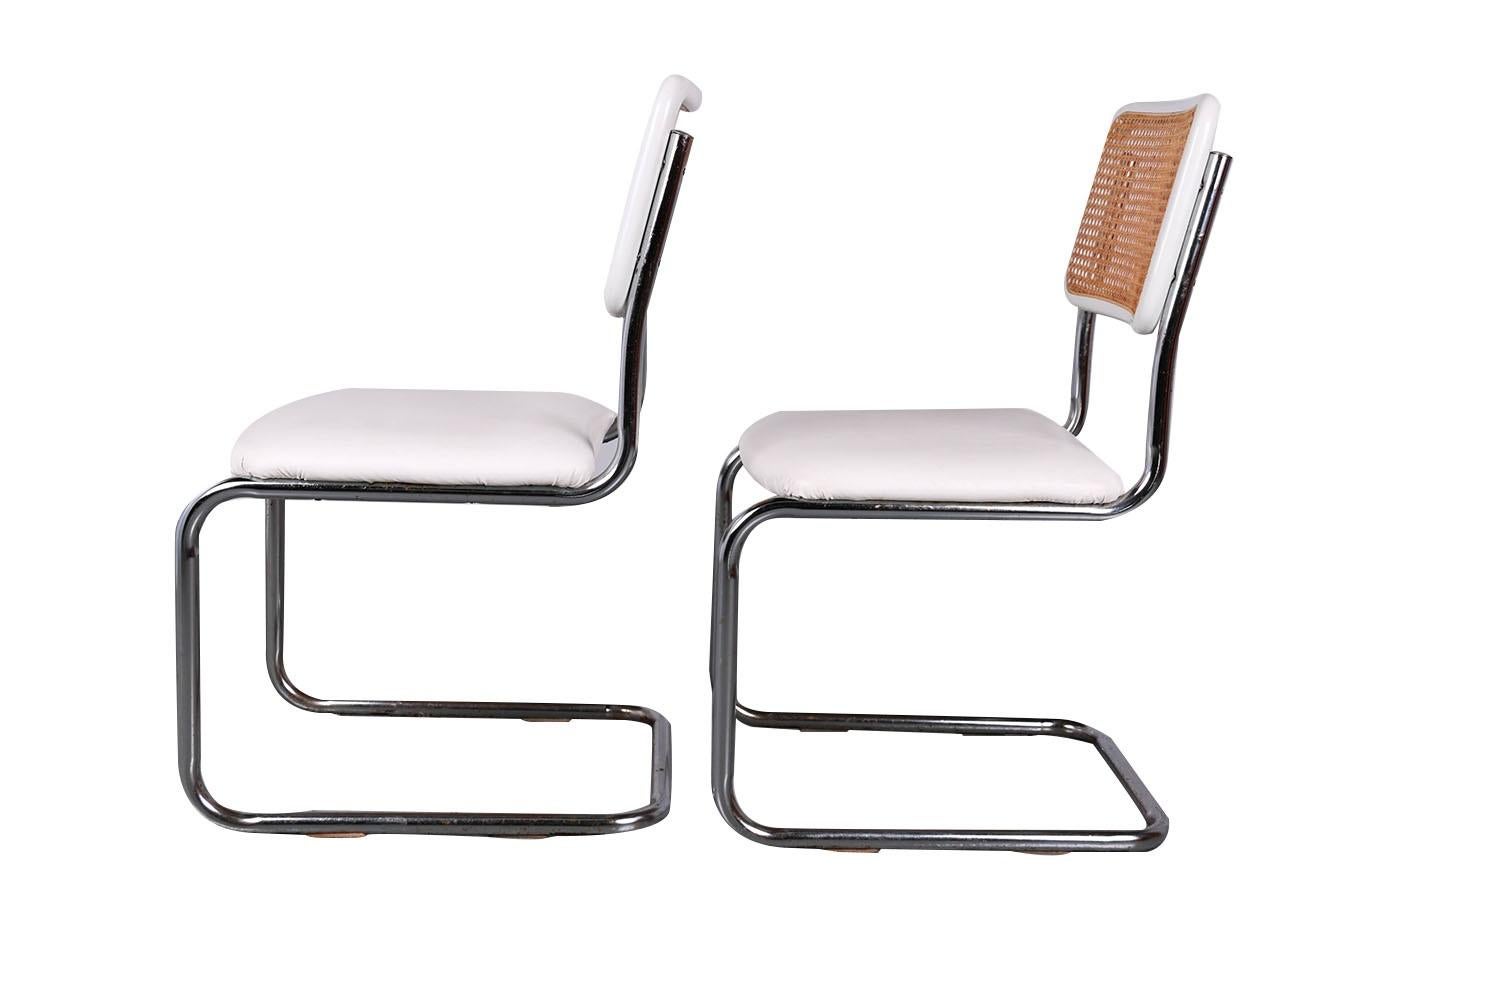 An attractive stylish pair of mid century cane bentwood cantilever chairs, based on a design by Marcel Breuer. Features a beautiful modernist chrome cantilever design, crafted of wood and hand-woven cane back inserts, tubular chromed frames with